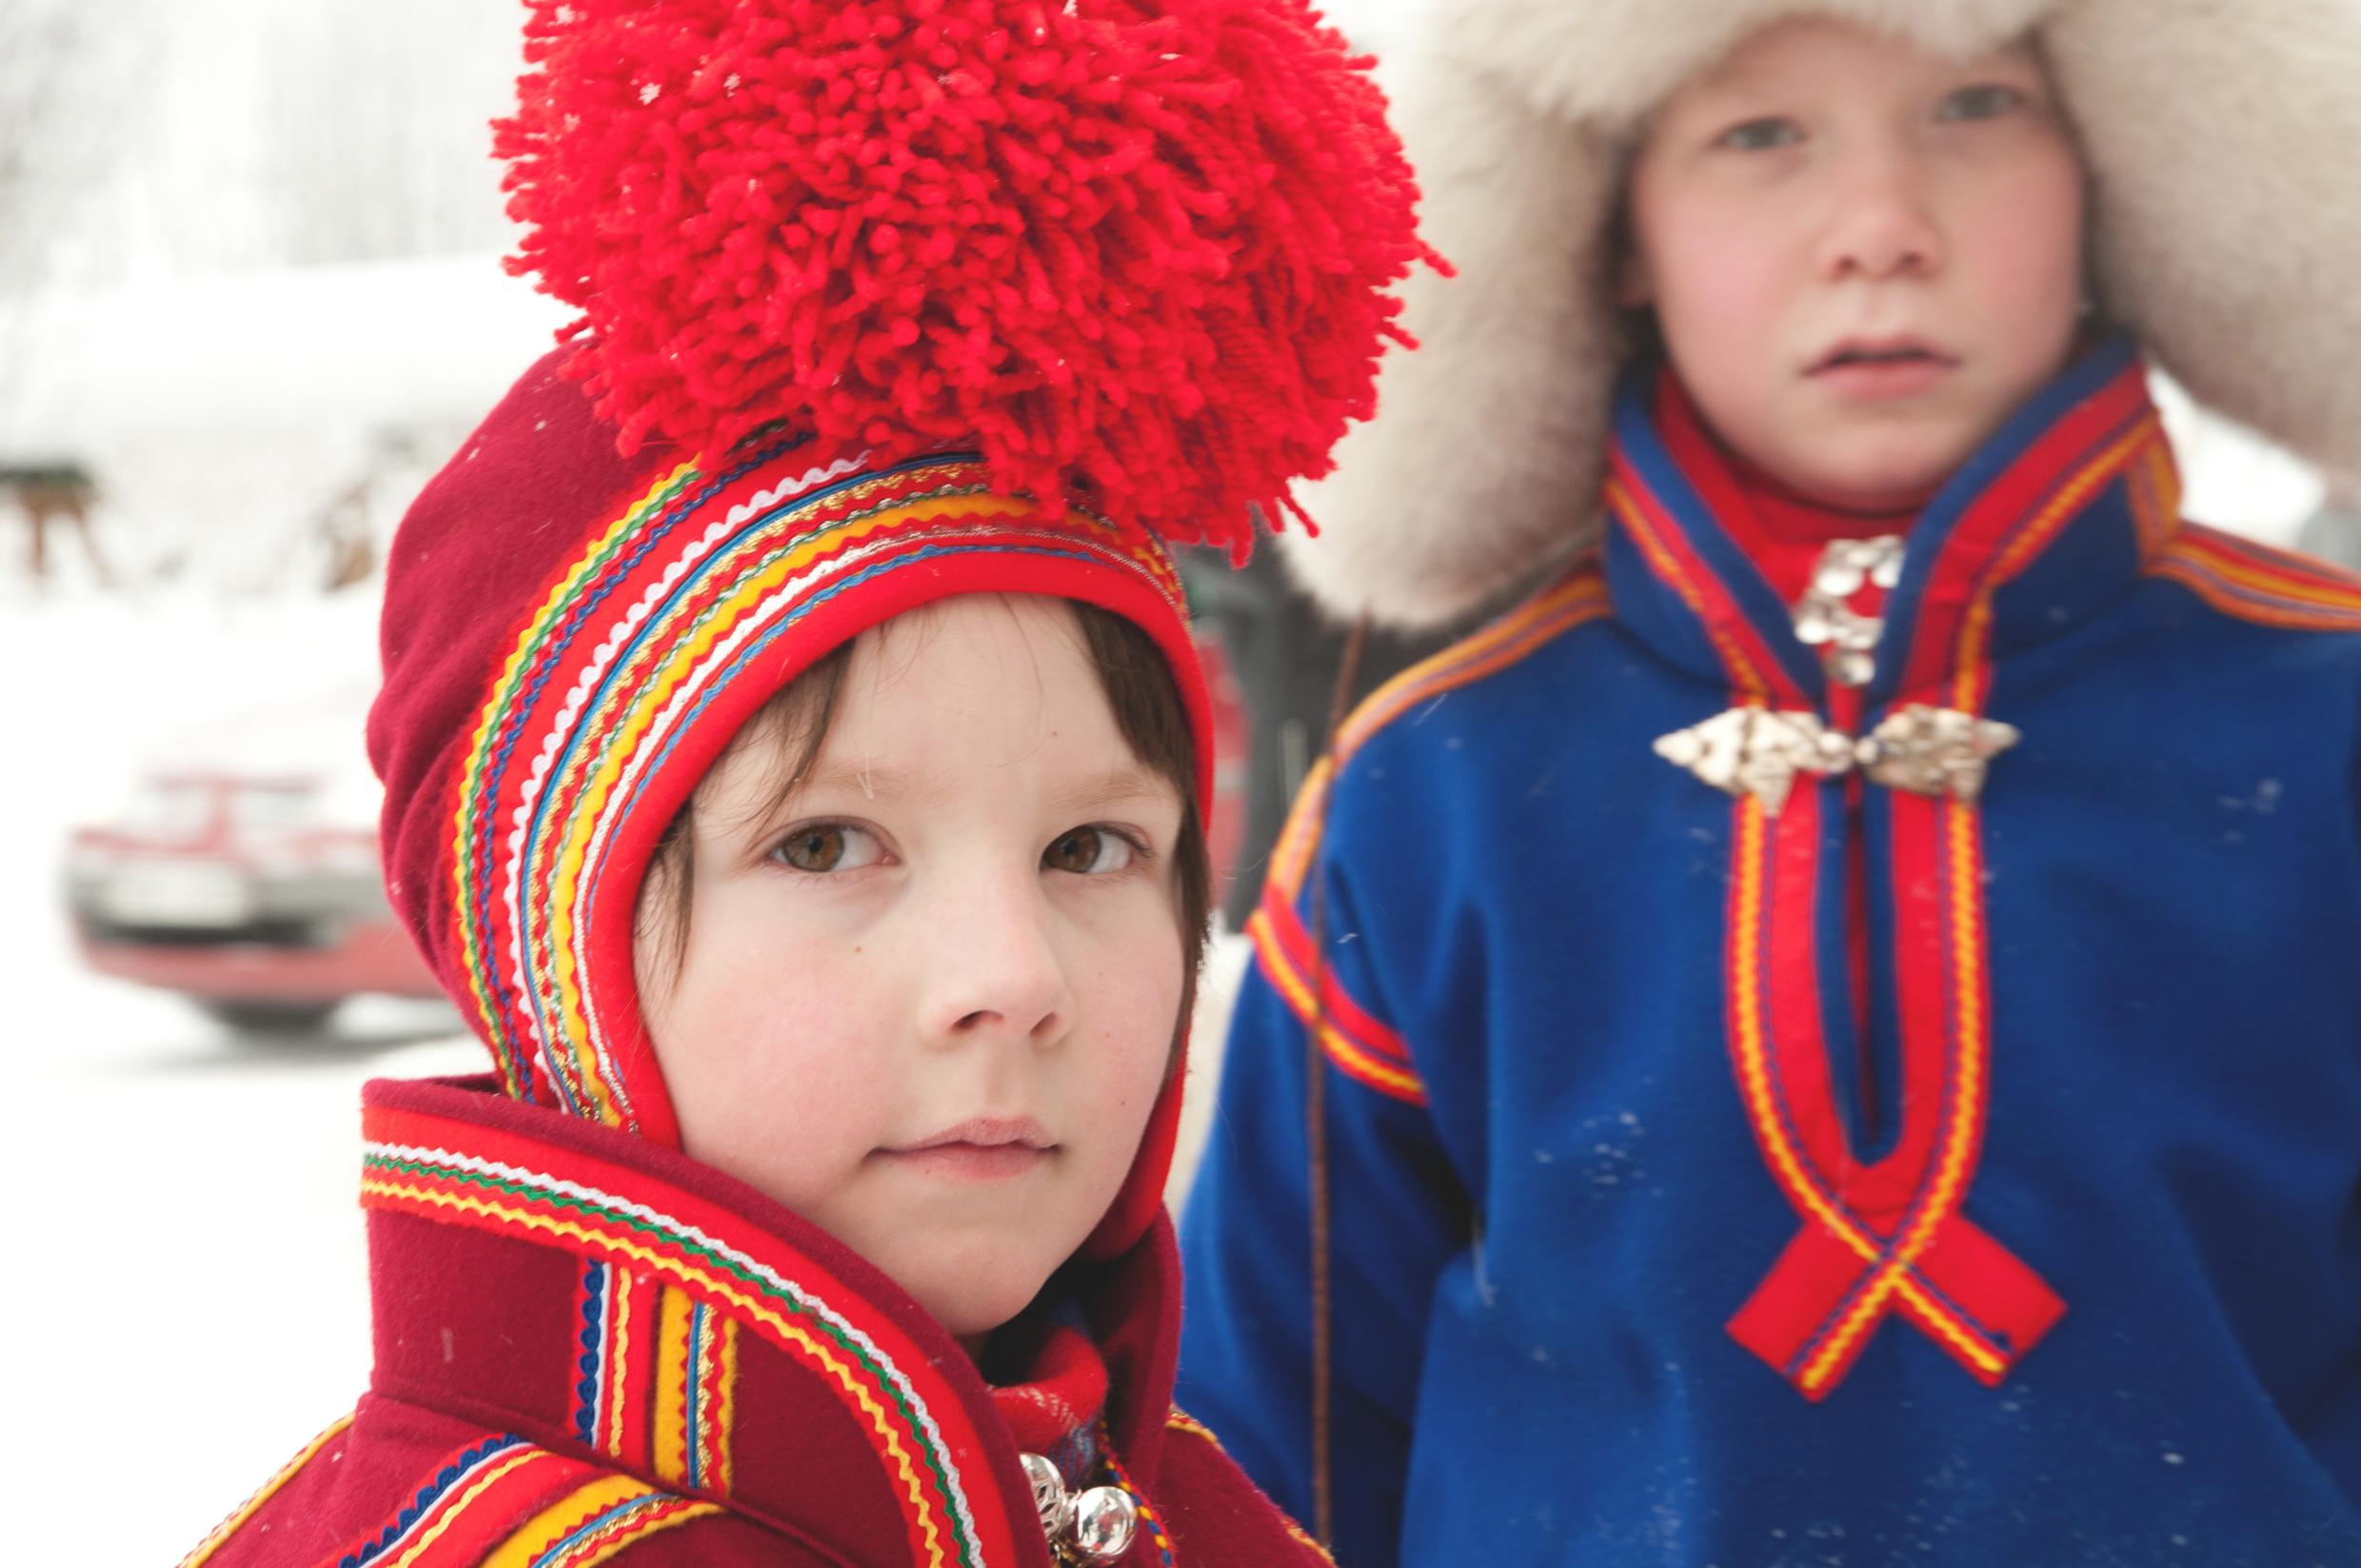 Close-up on a Sami child wearing their red traditional folk costume. Blurry in the background another child with a blue folk costume.